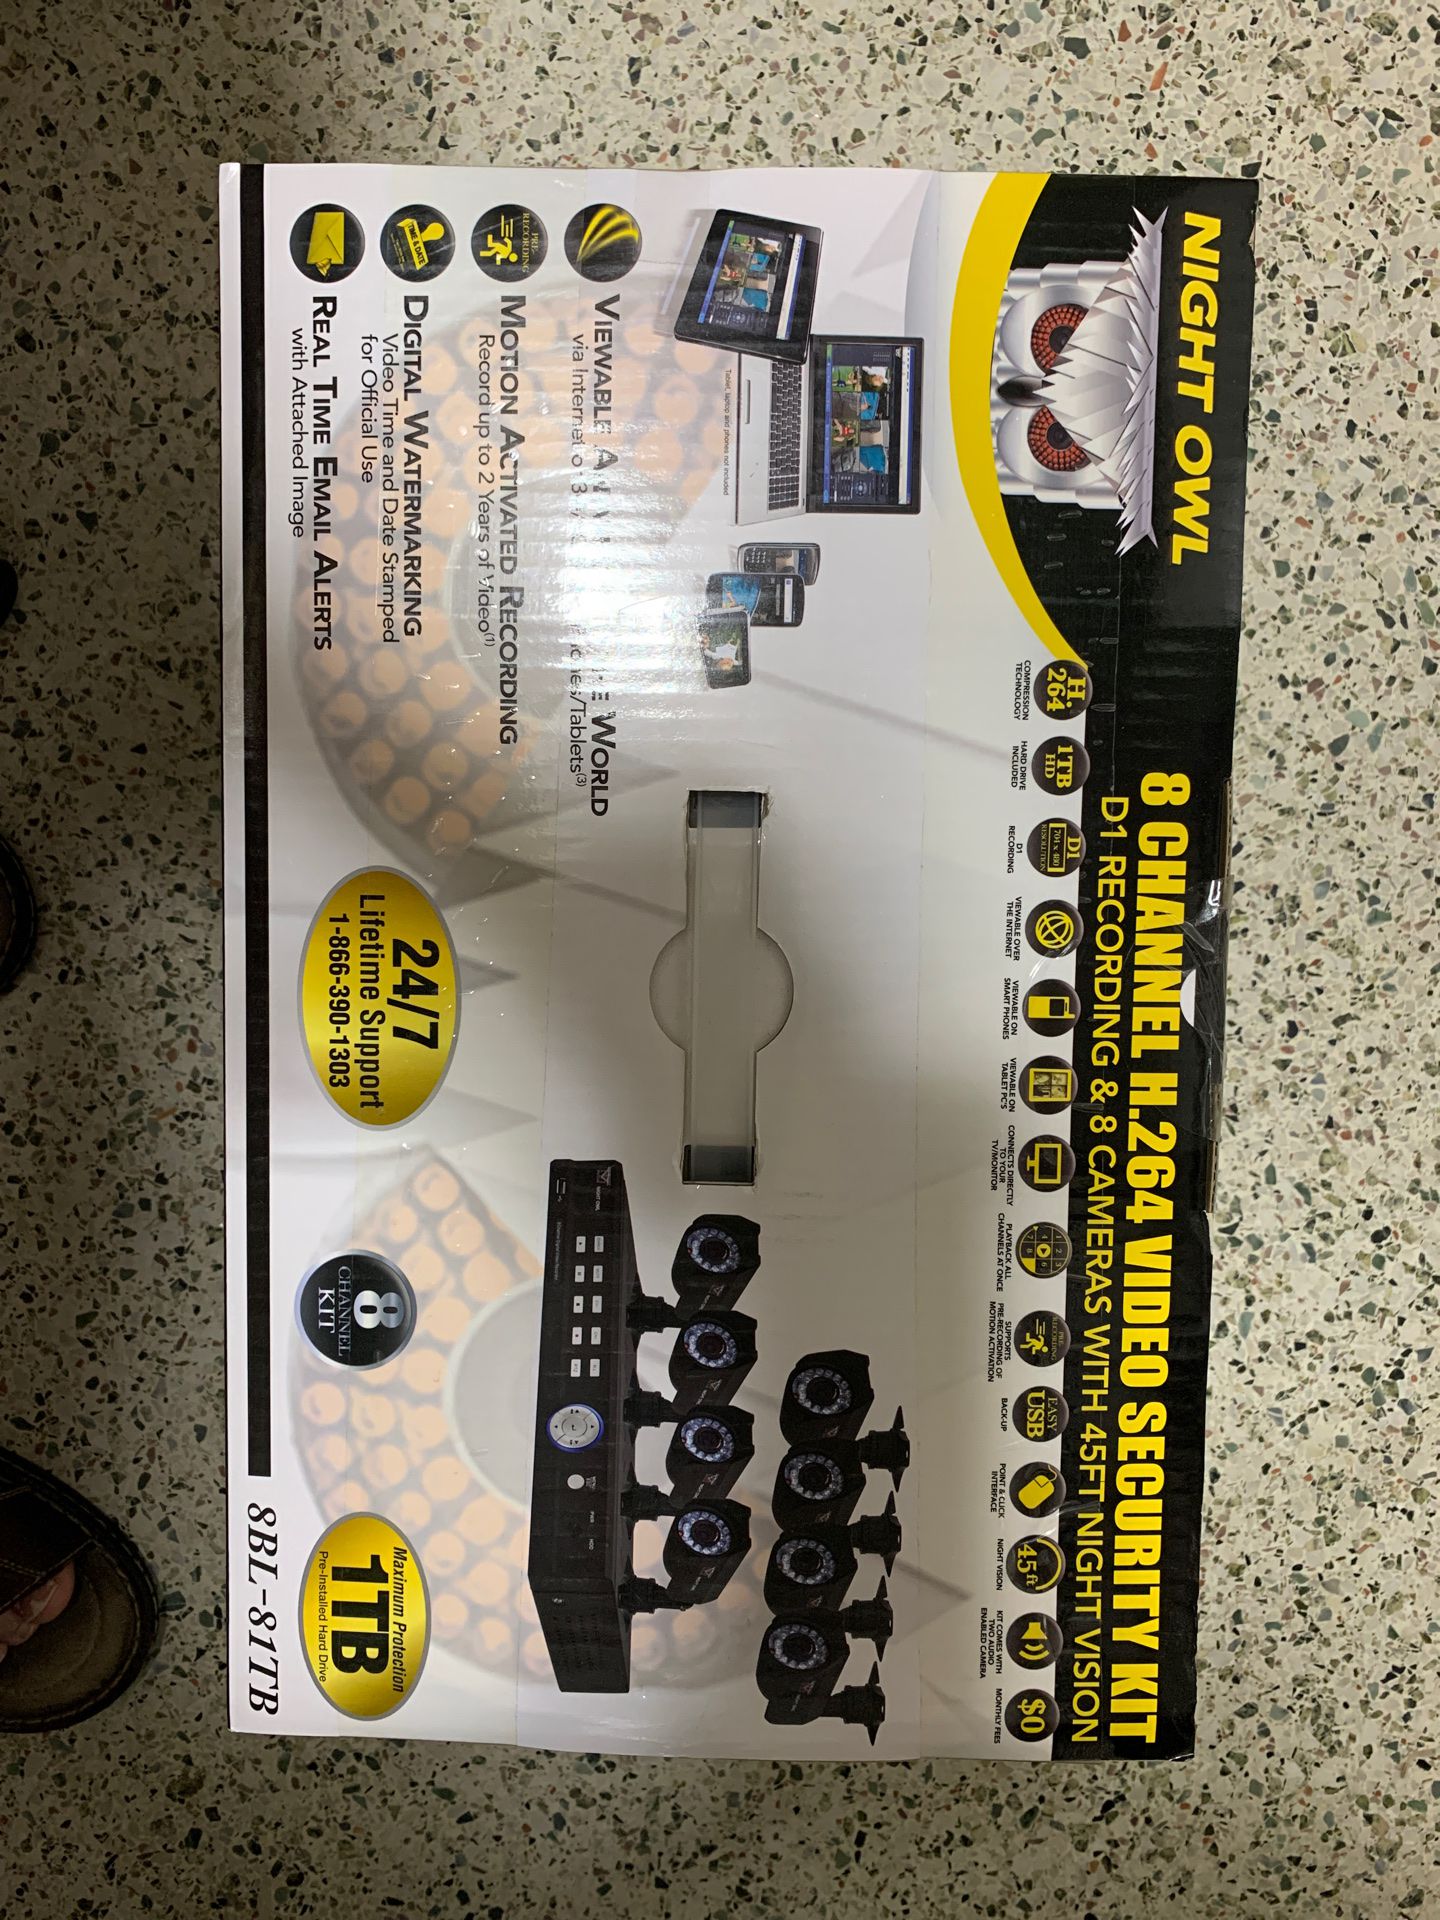 Brand new in a sealed box 8 channels security kit.